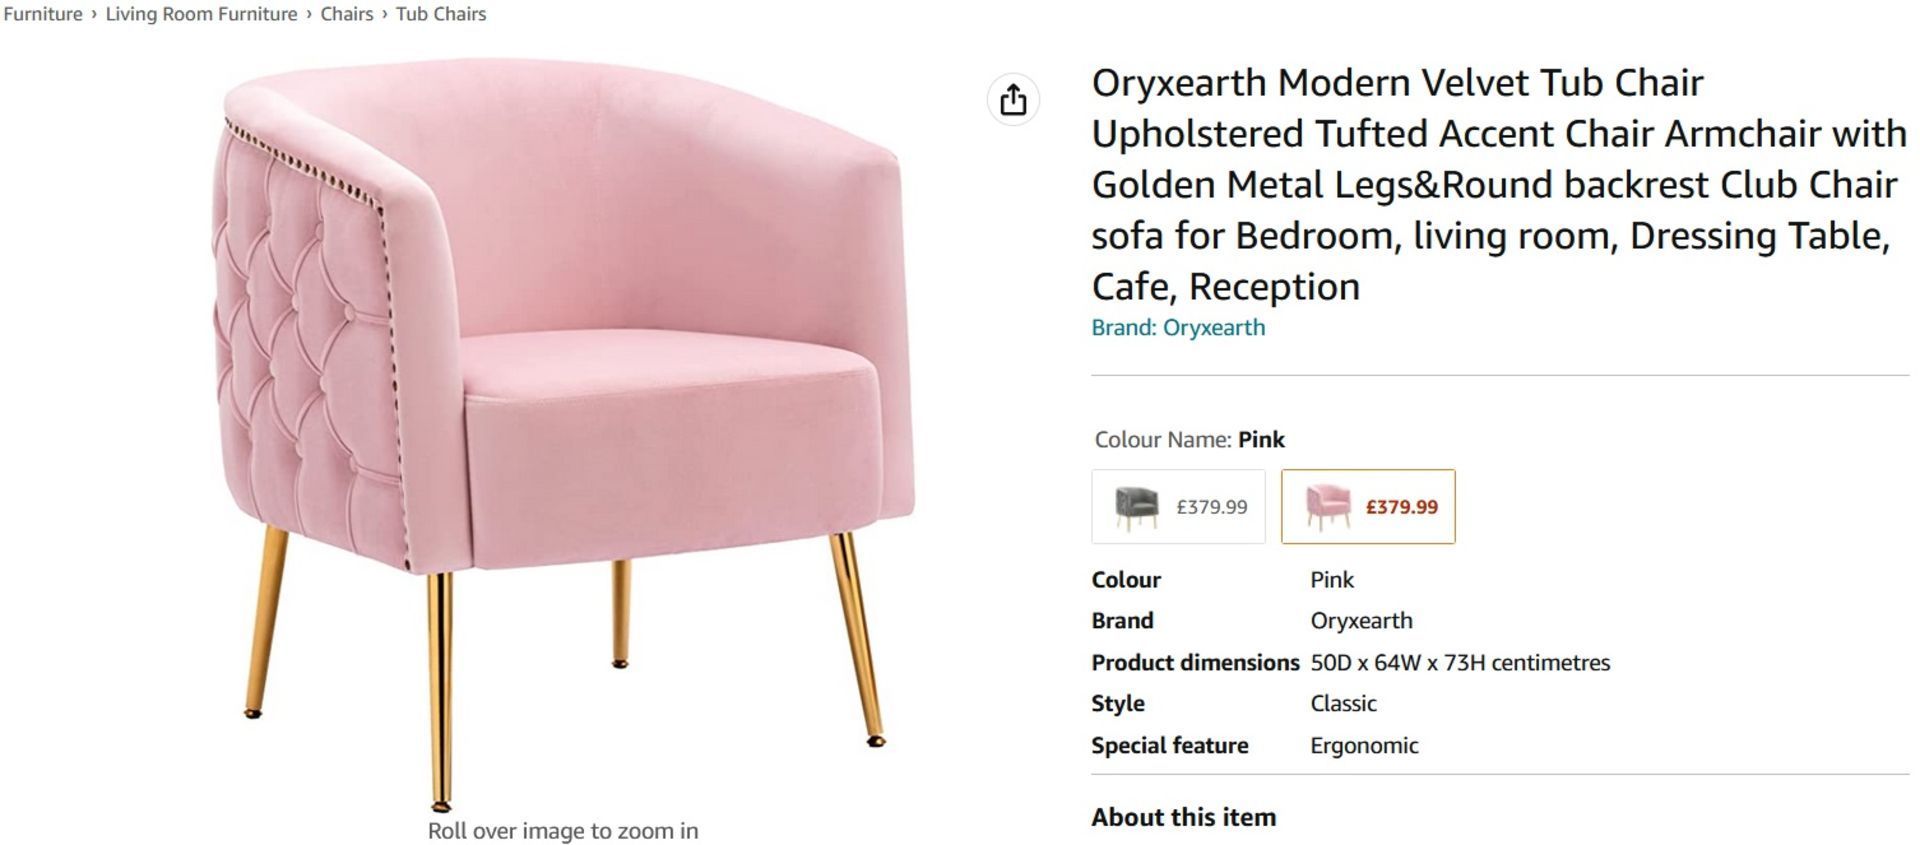 PALLET TO CONTAIN 6x NEW Oryxearth Velvet Barrel Chair Modern Accent Chair with Golden Metal Legs - Image 2 of 4